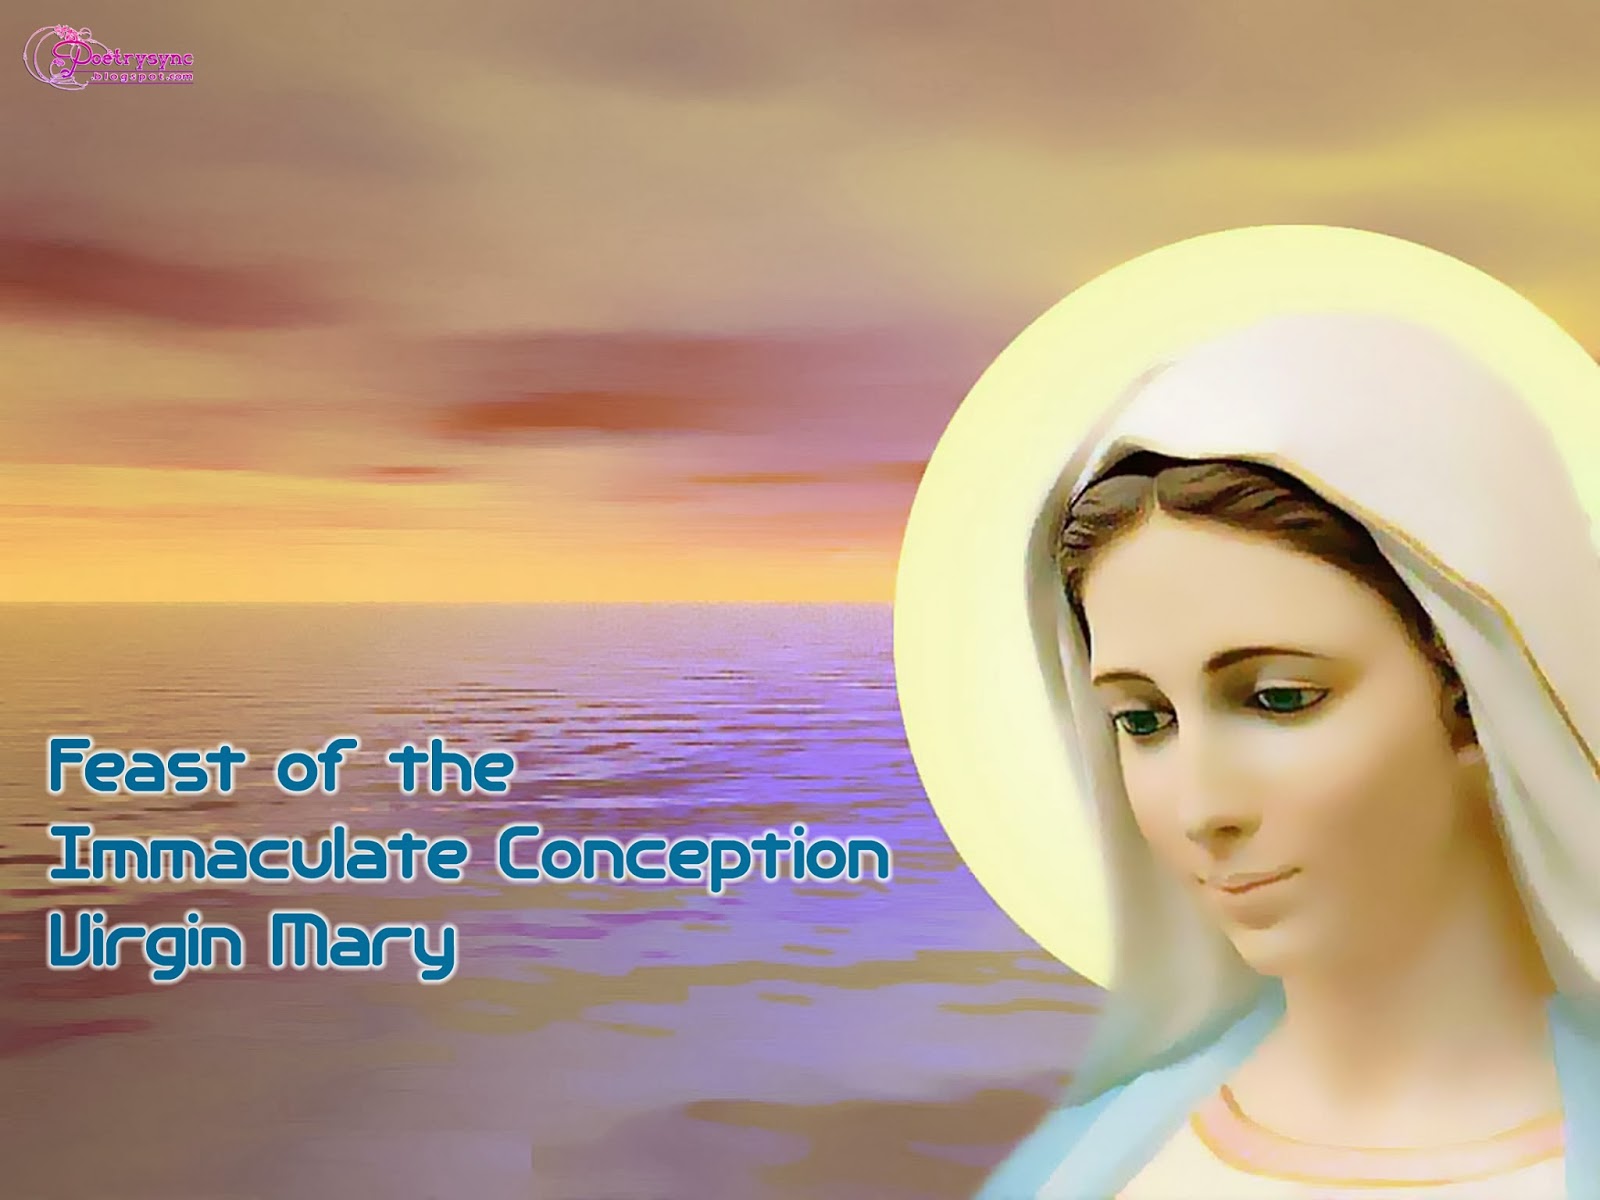 Virgin Mary Pictures And Wallpapers Feast Of The Immaculate Conception